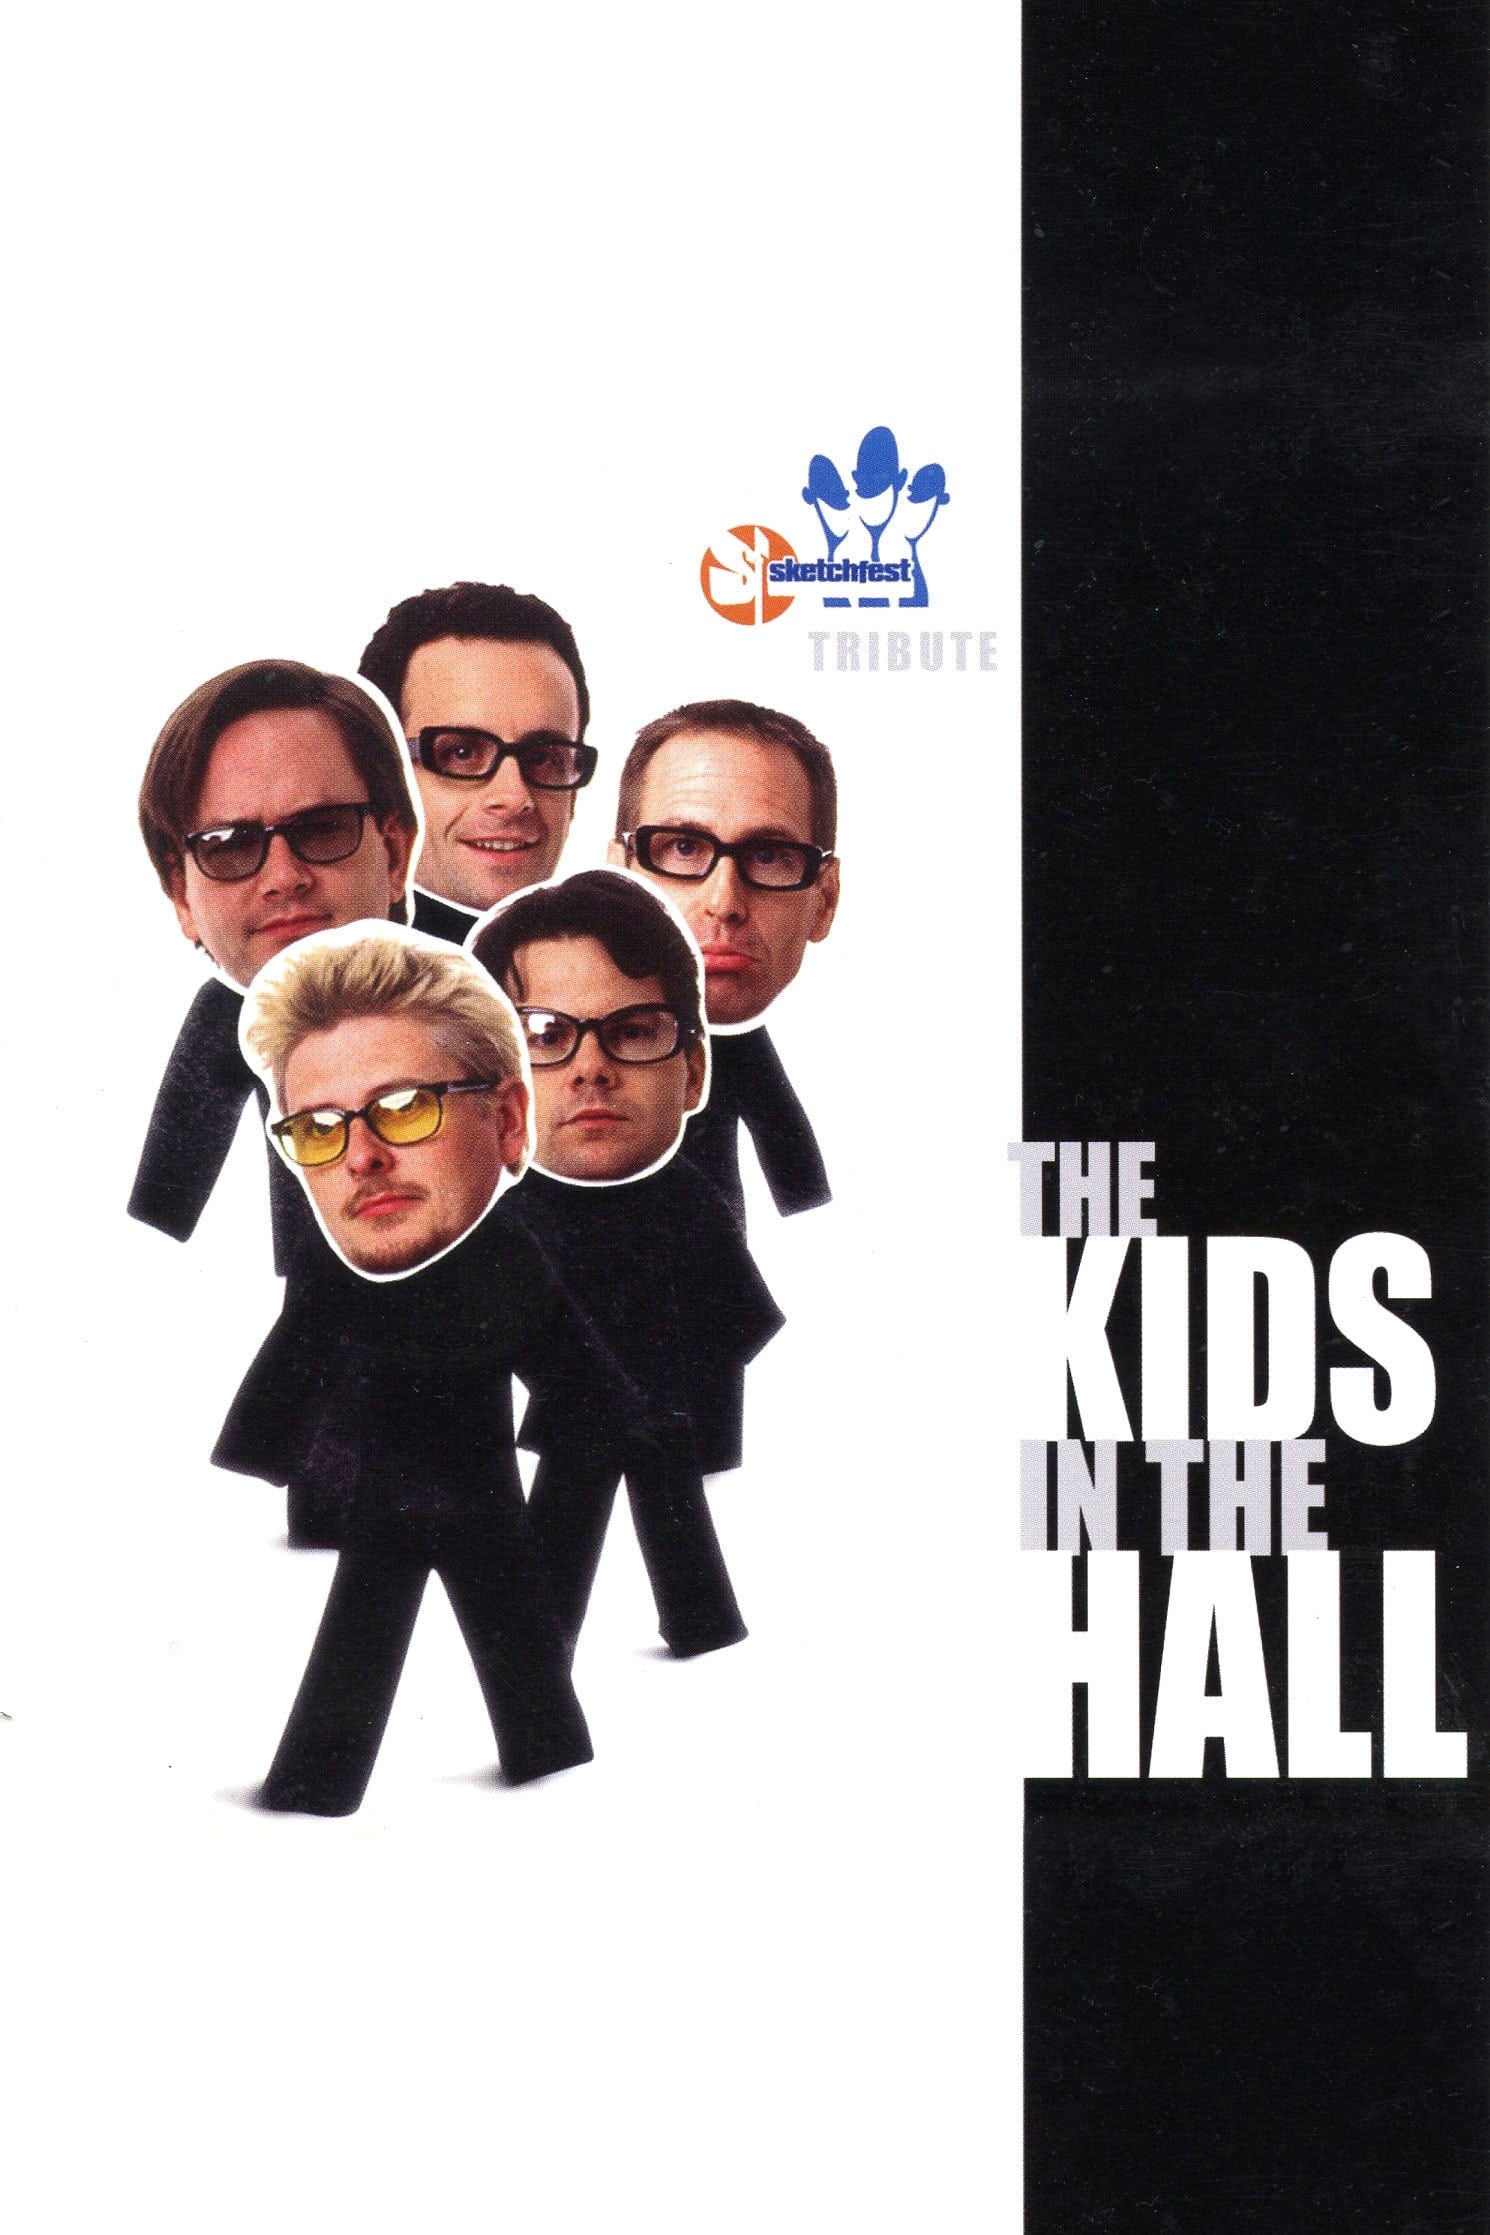 Kids in the Hall: Sketchfest Tribute (2008)